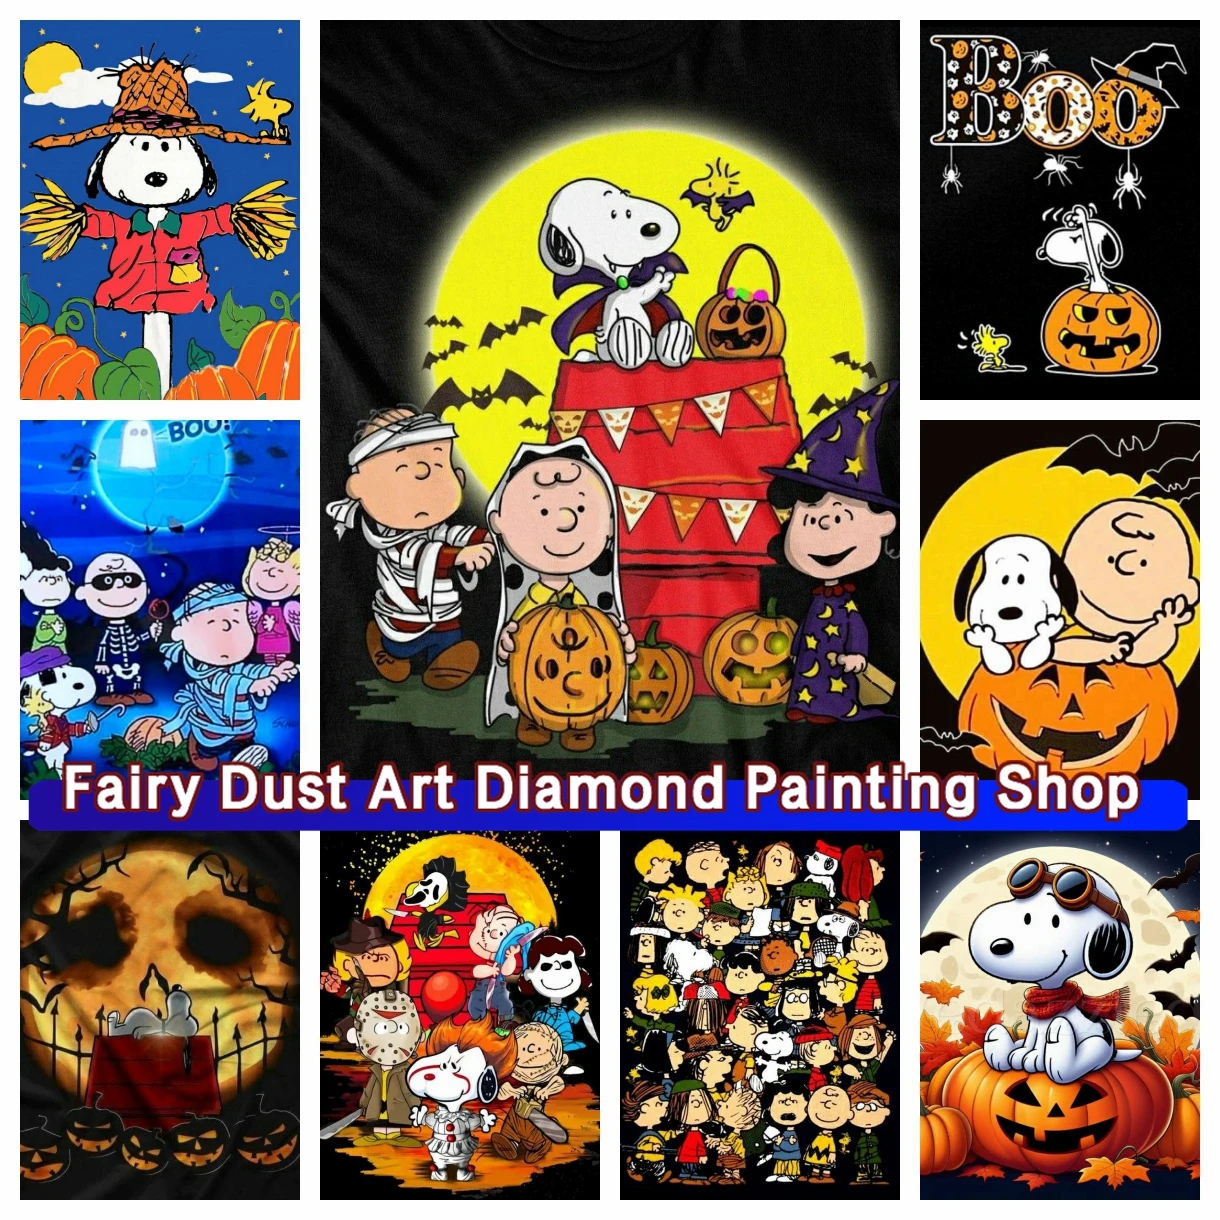 

Snoopy Scary Pumpkin Head Dream DIY Diamond Painting New Arrivals 5D Full Cross Stitch Kit Mosaic Embroidery Home Decor Gift